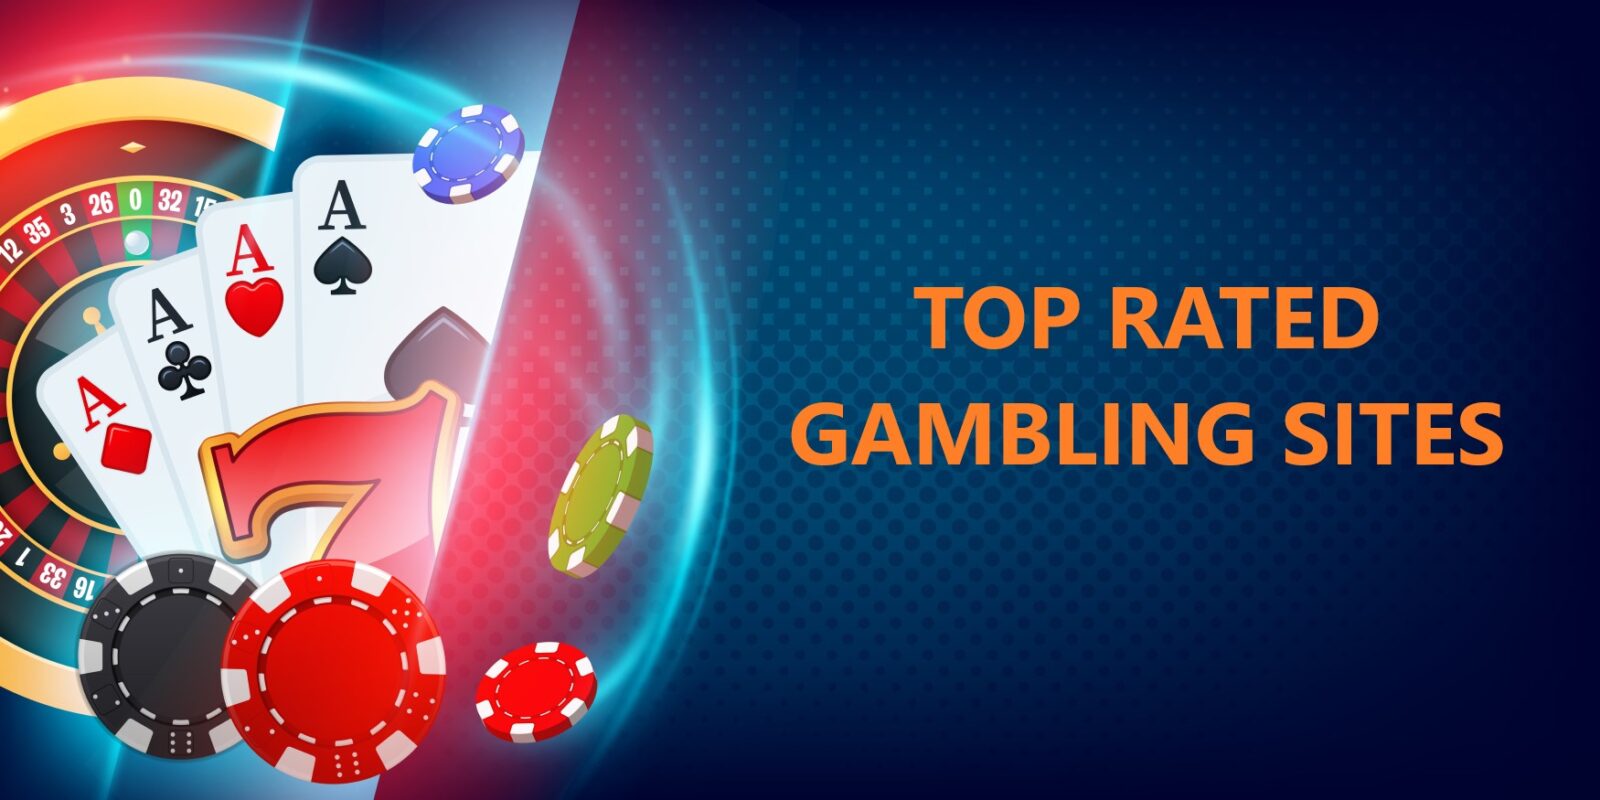 Top Rated Gambling Sites in 2023